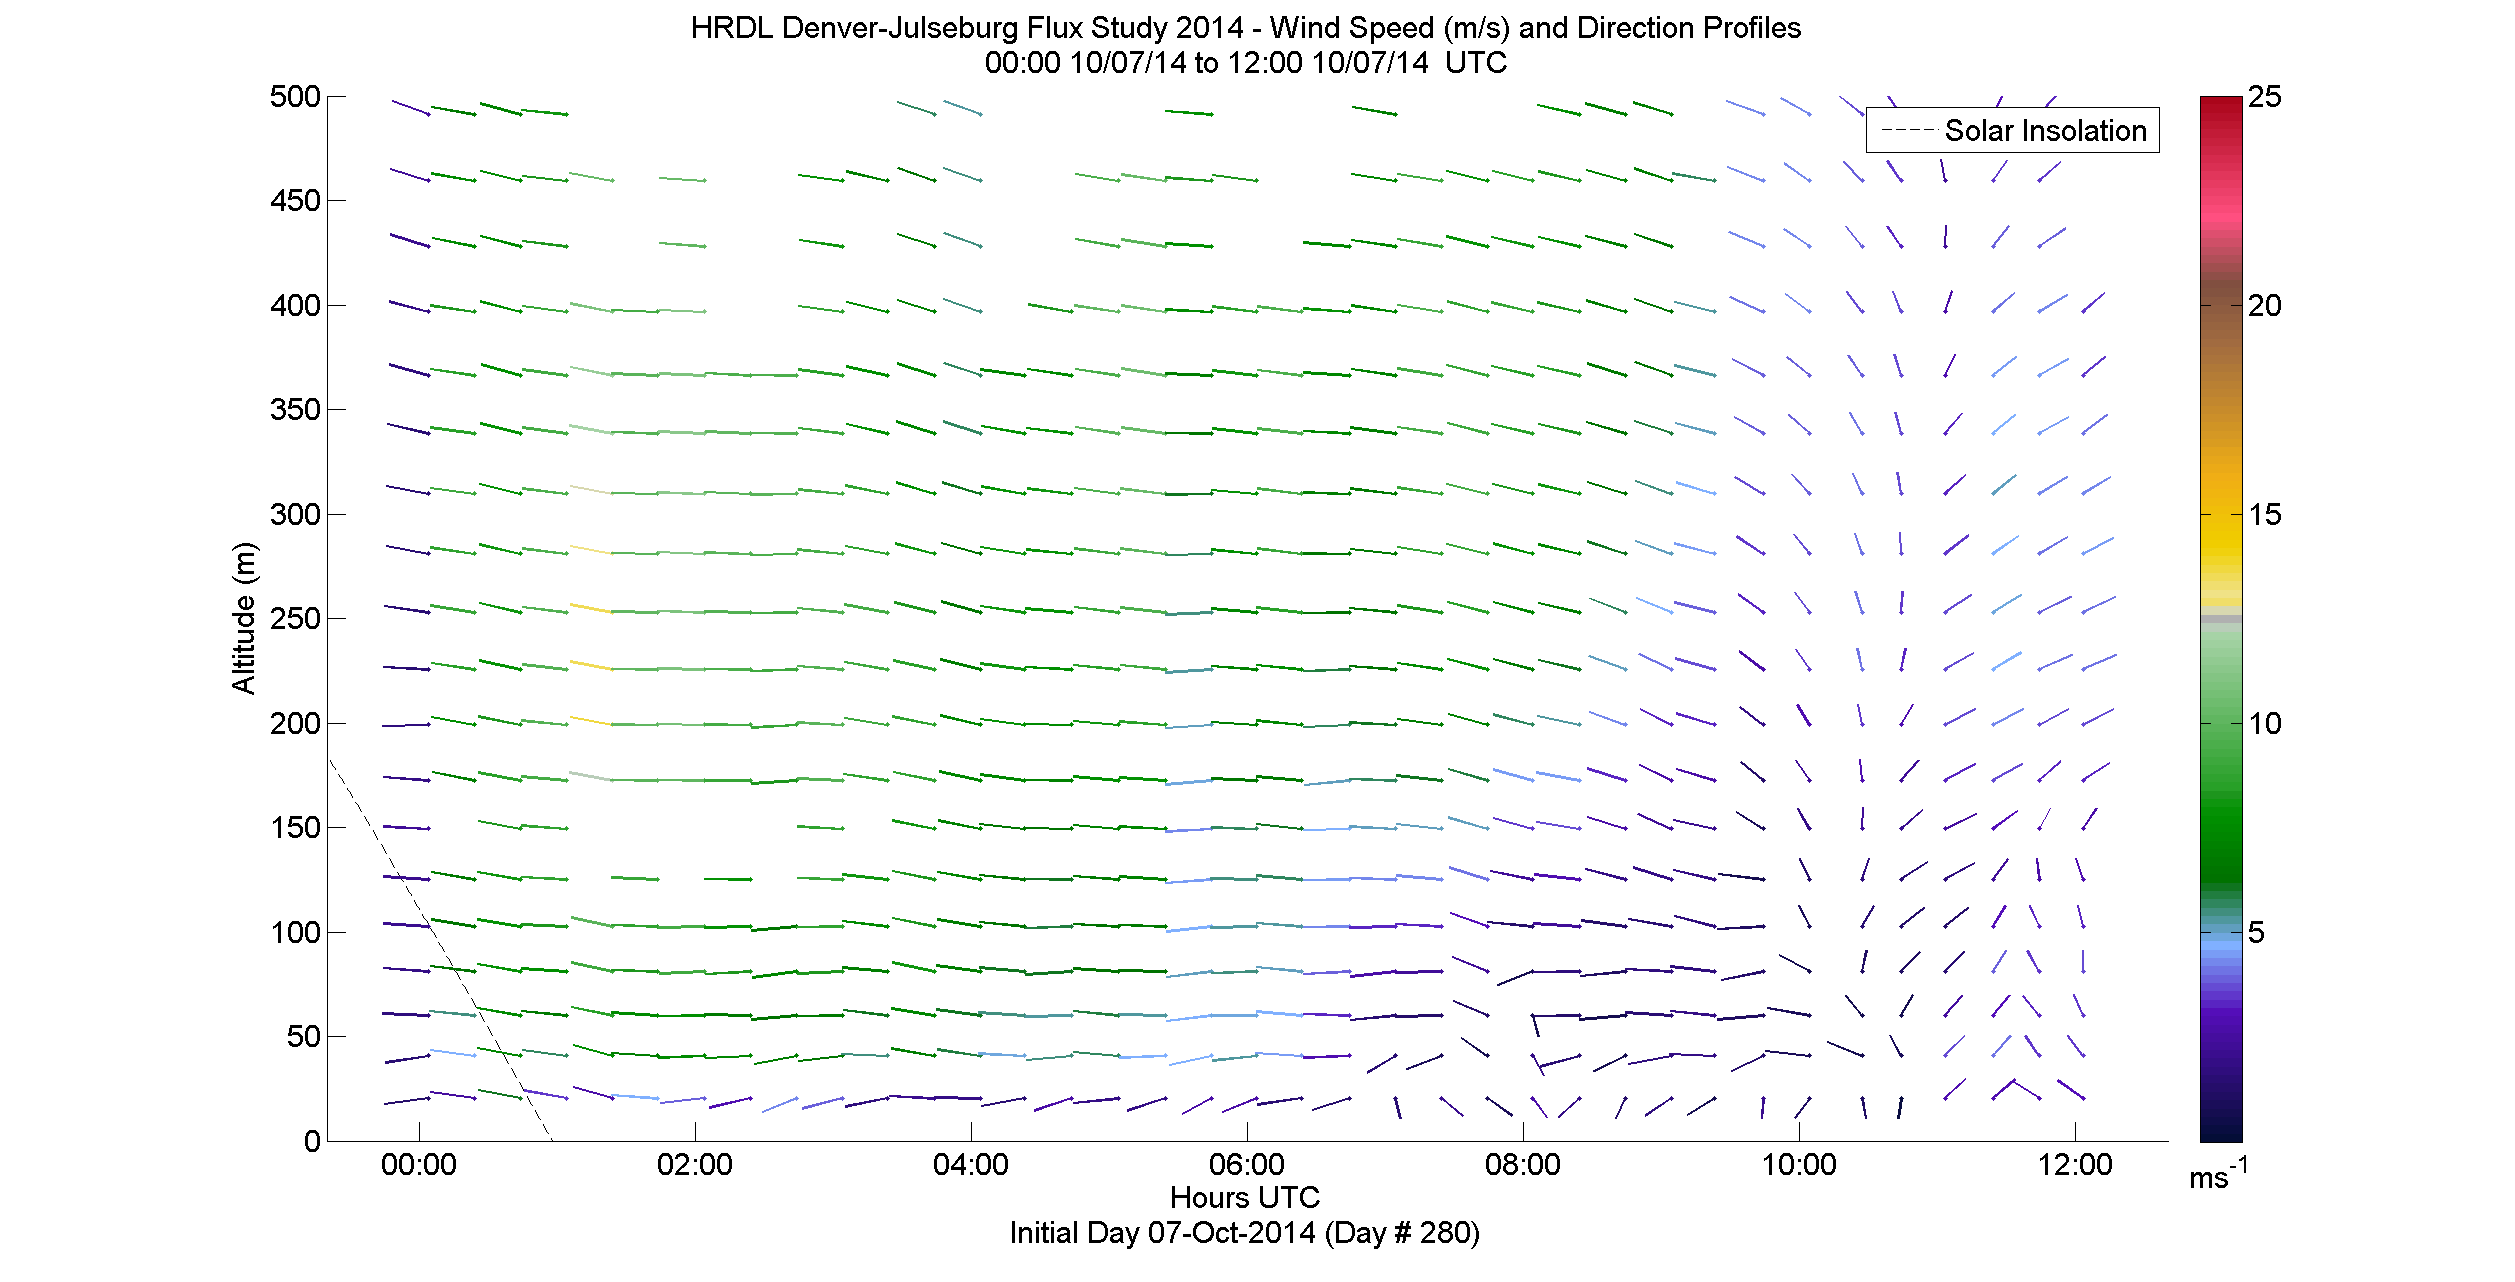 HRDL speed and direction profile - October 7 am